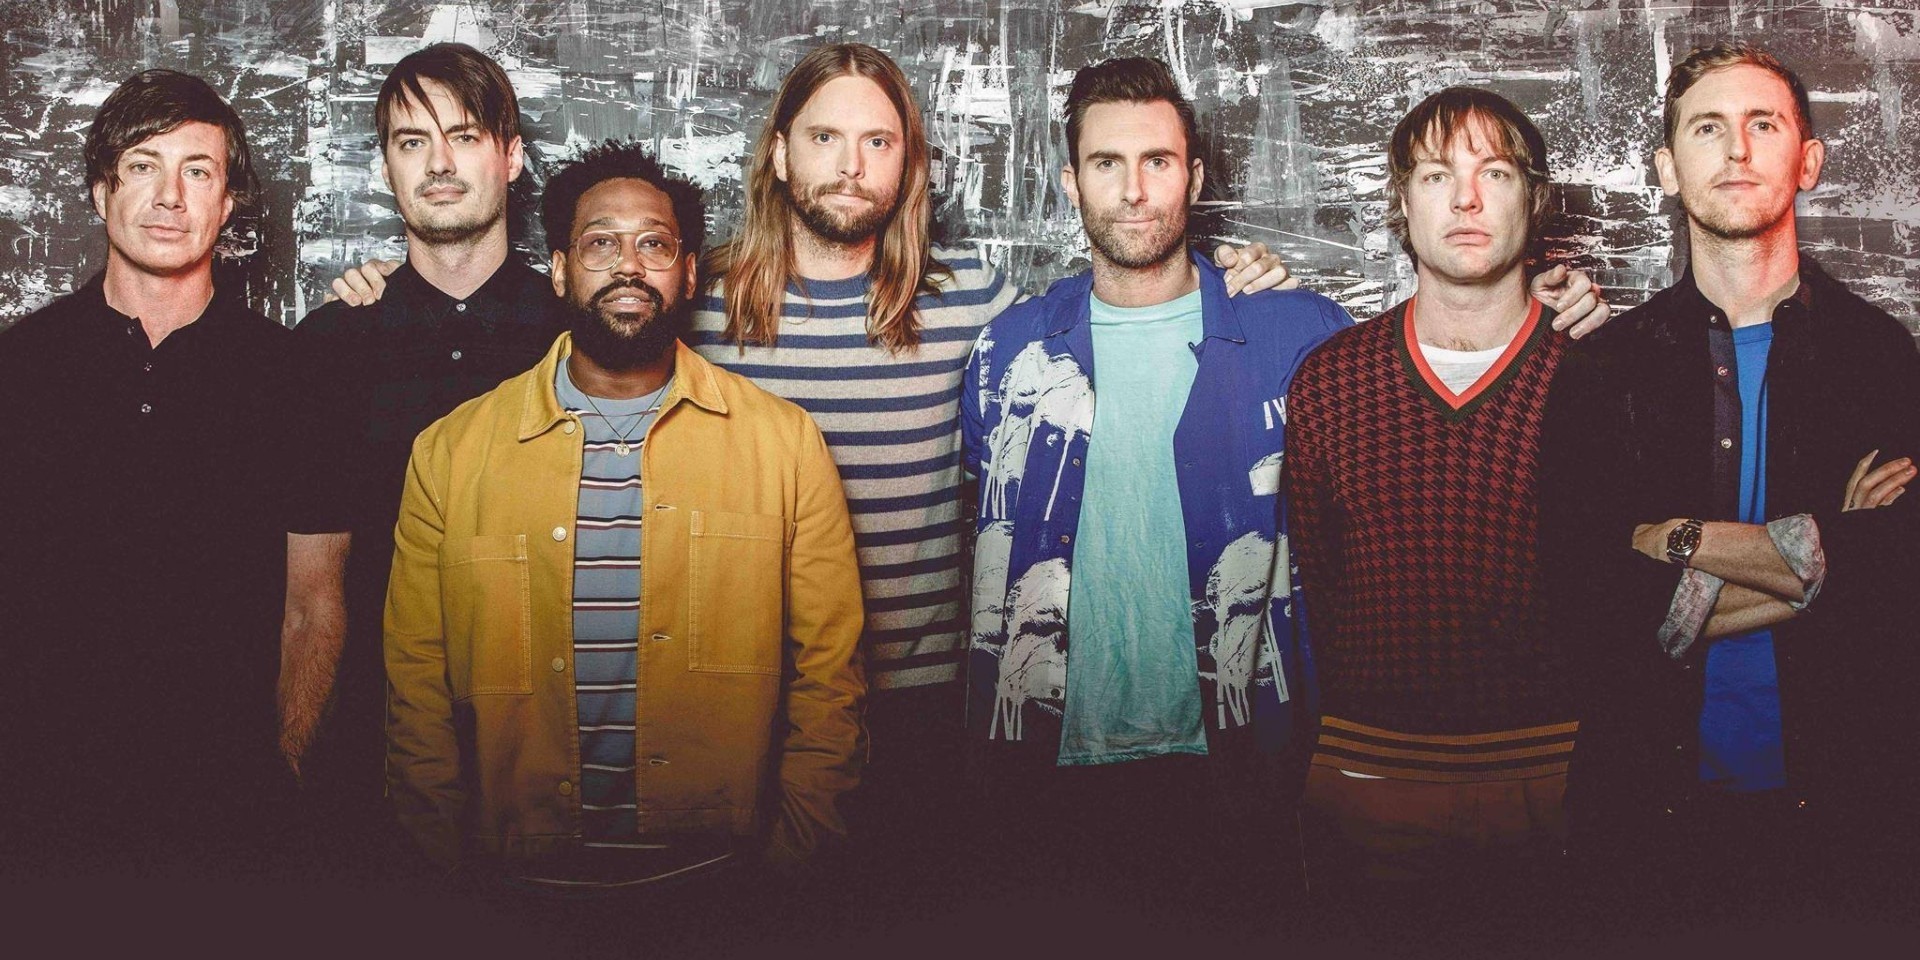 Maroon 5 announces #REDPILLBLUES Tour - stops in Singapore, Manila and Tokyo included 